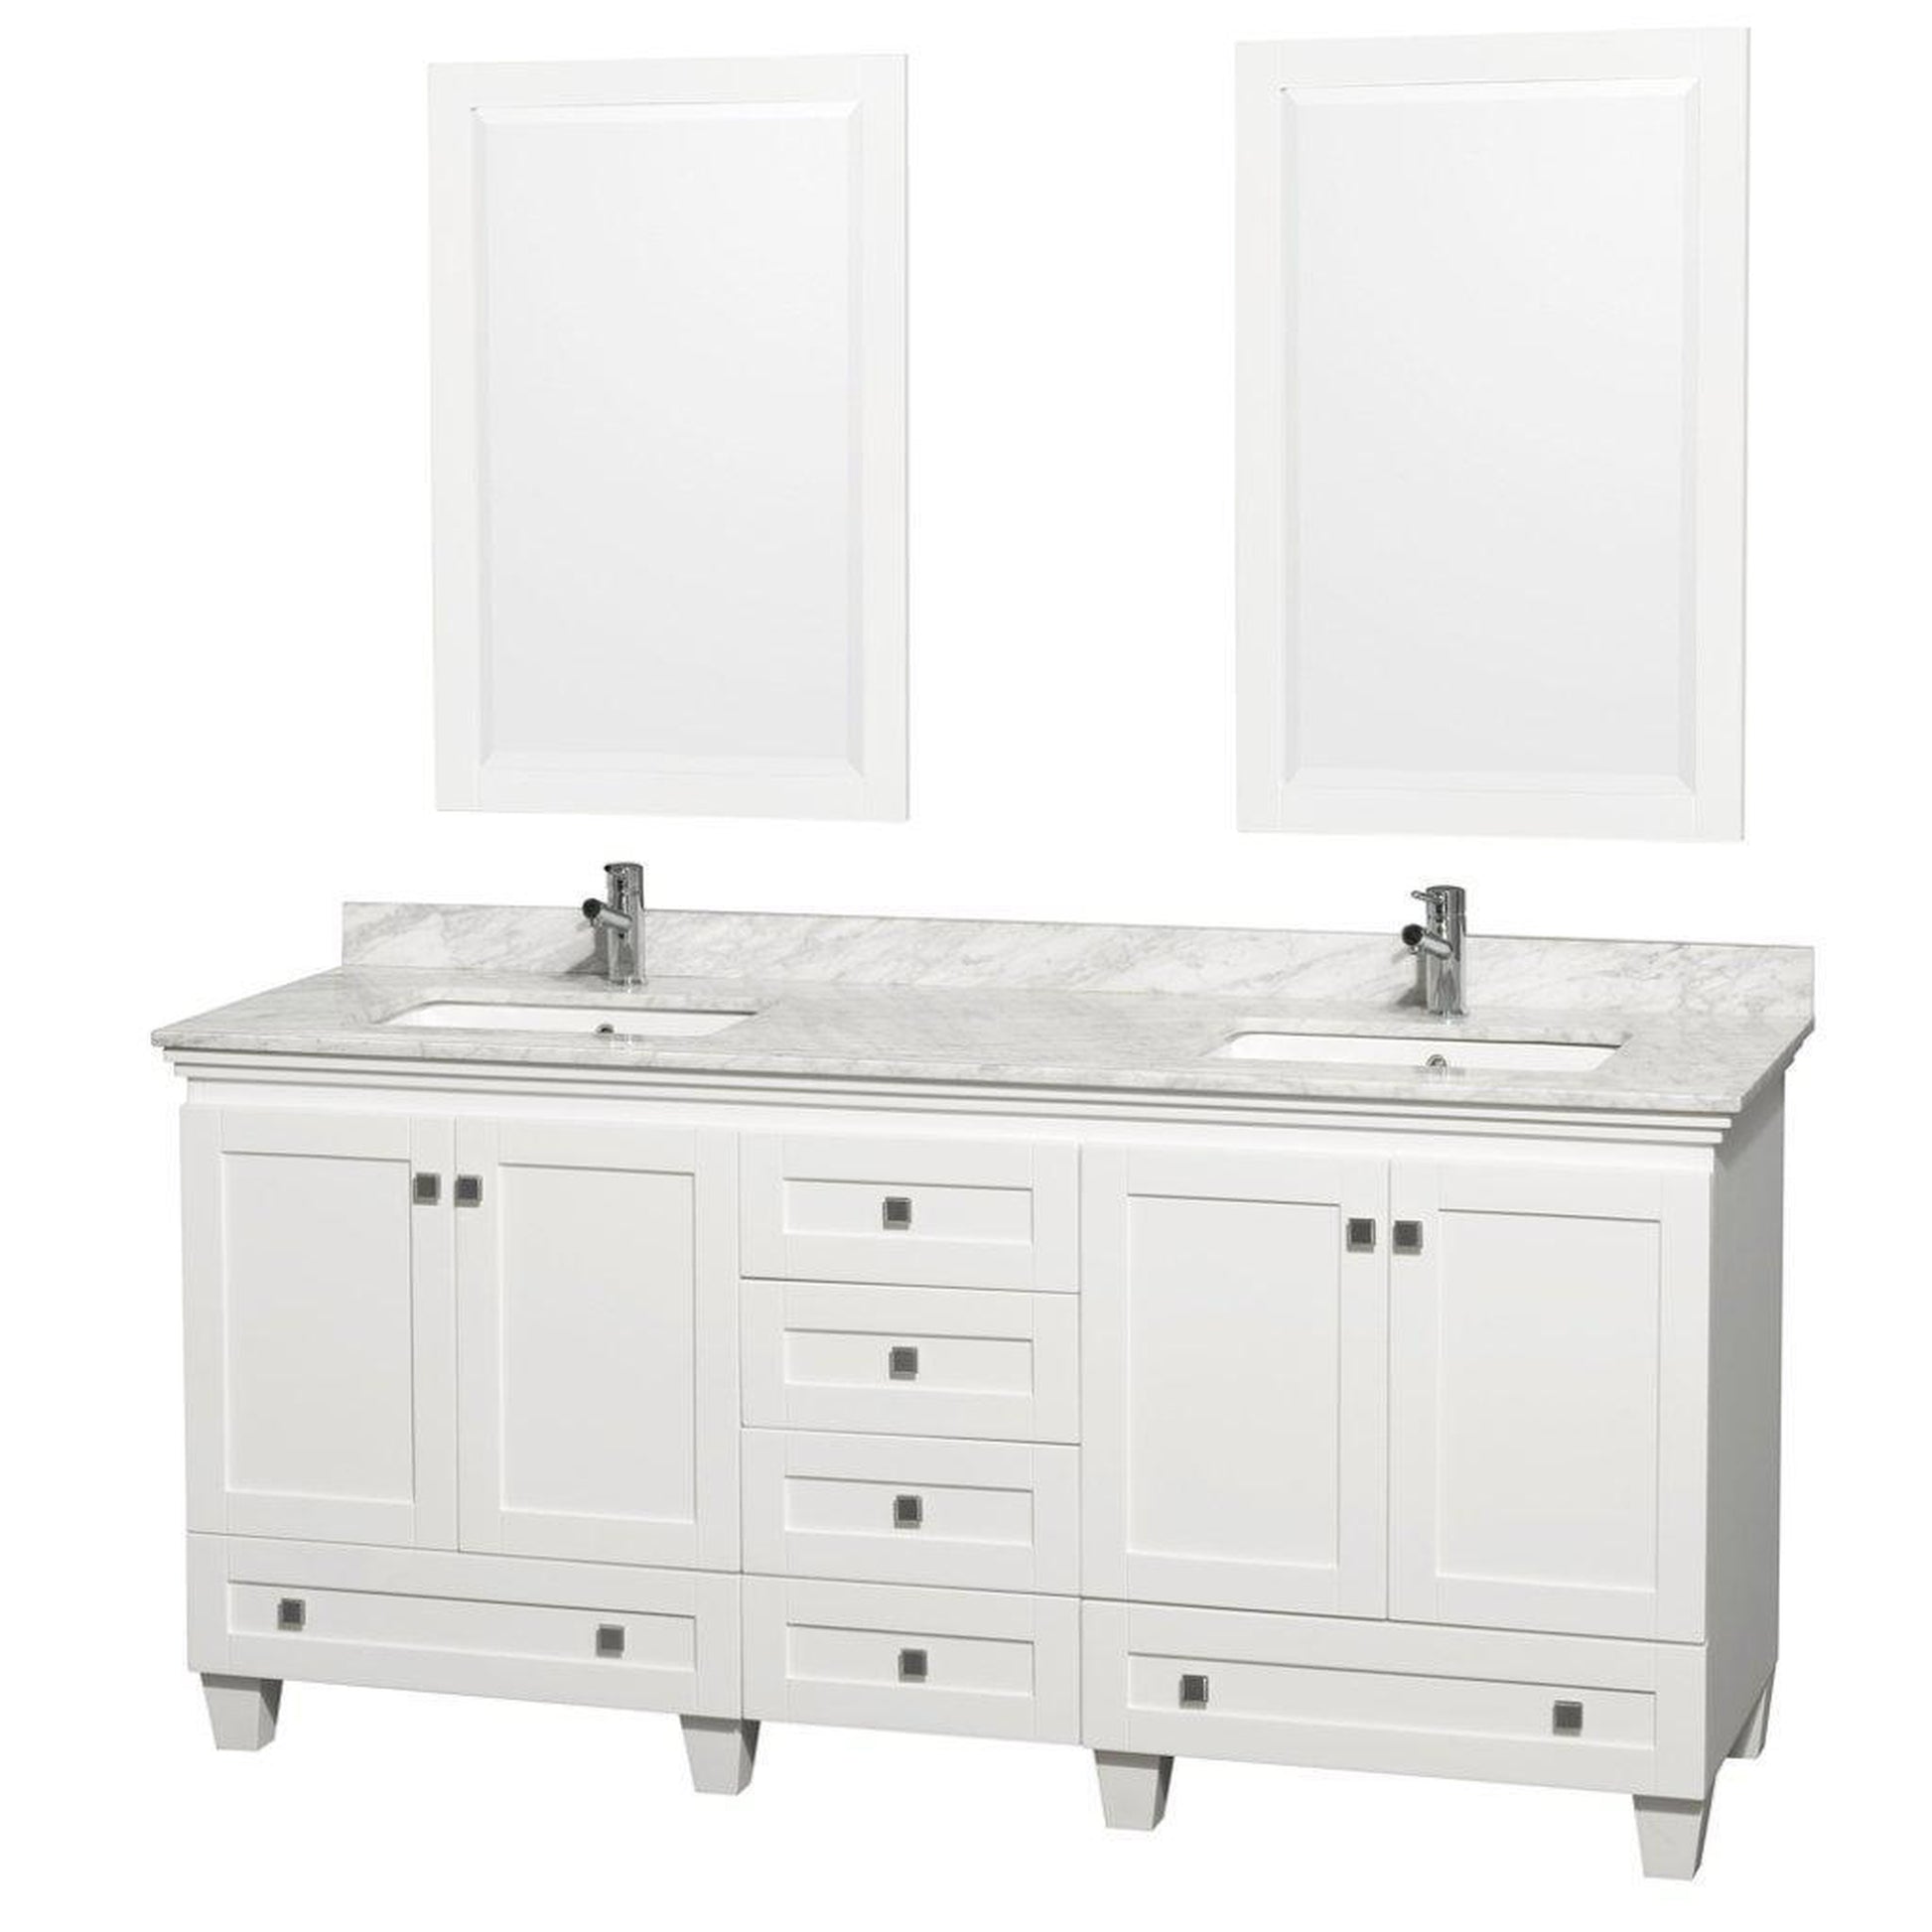 Wyndham Collection Acclaim 72" Double Bathroom White Vanity With White Carrara Marble Countertop And Undermount Square Sinks And 2 Set Of 24" Mirror